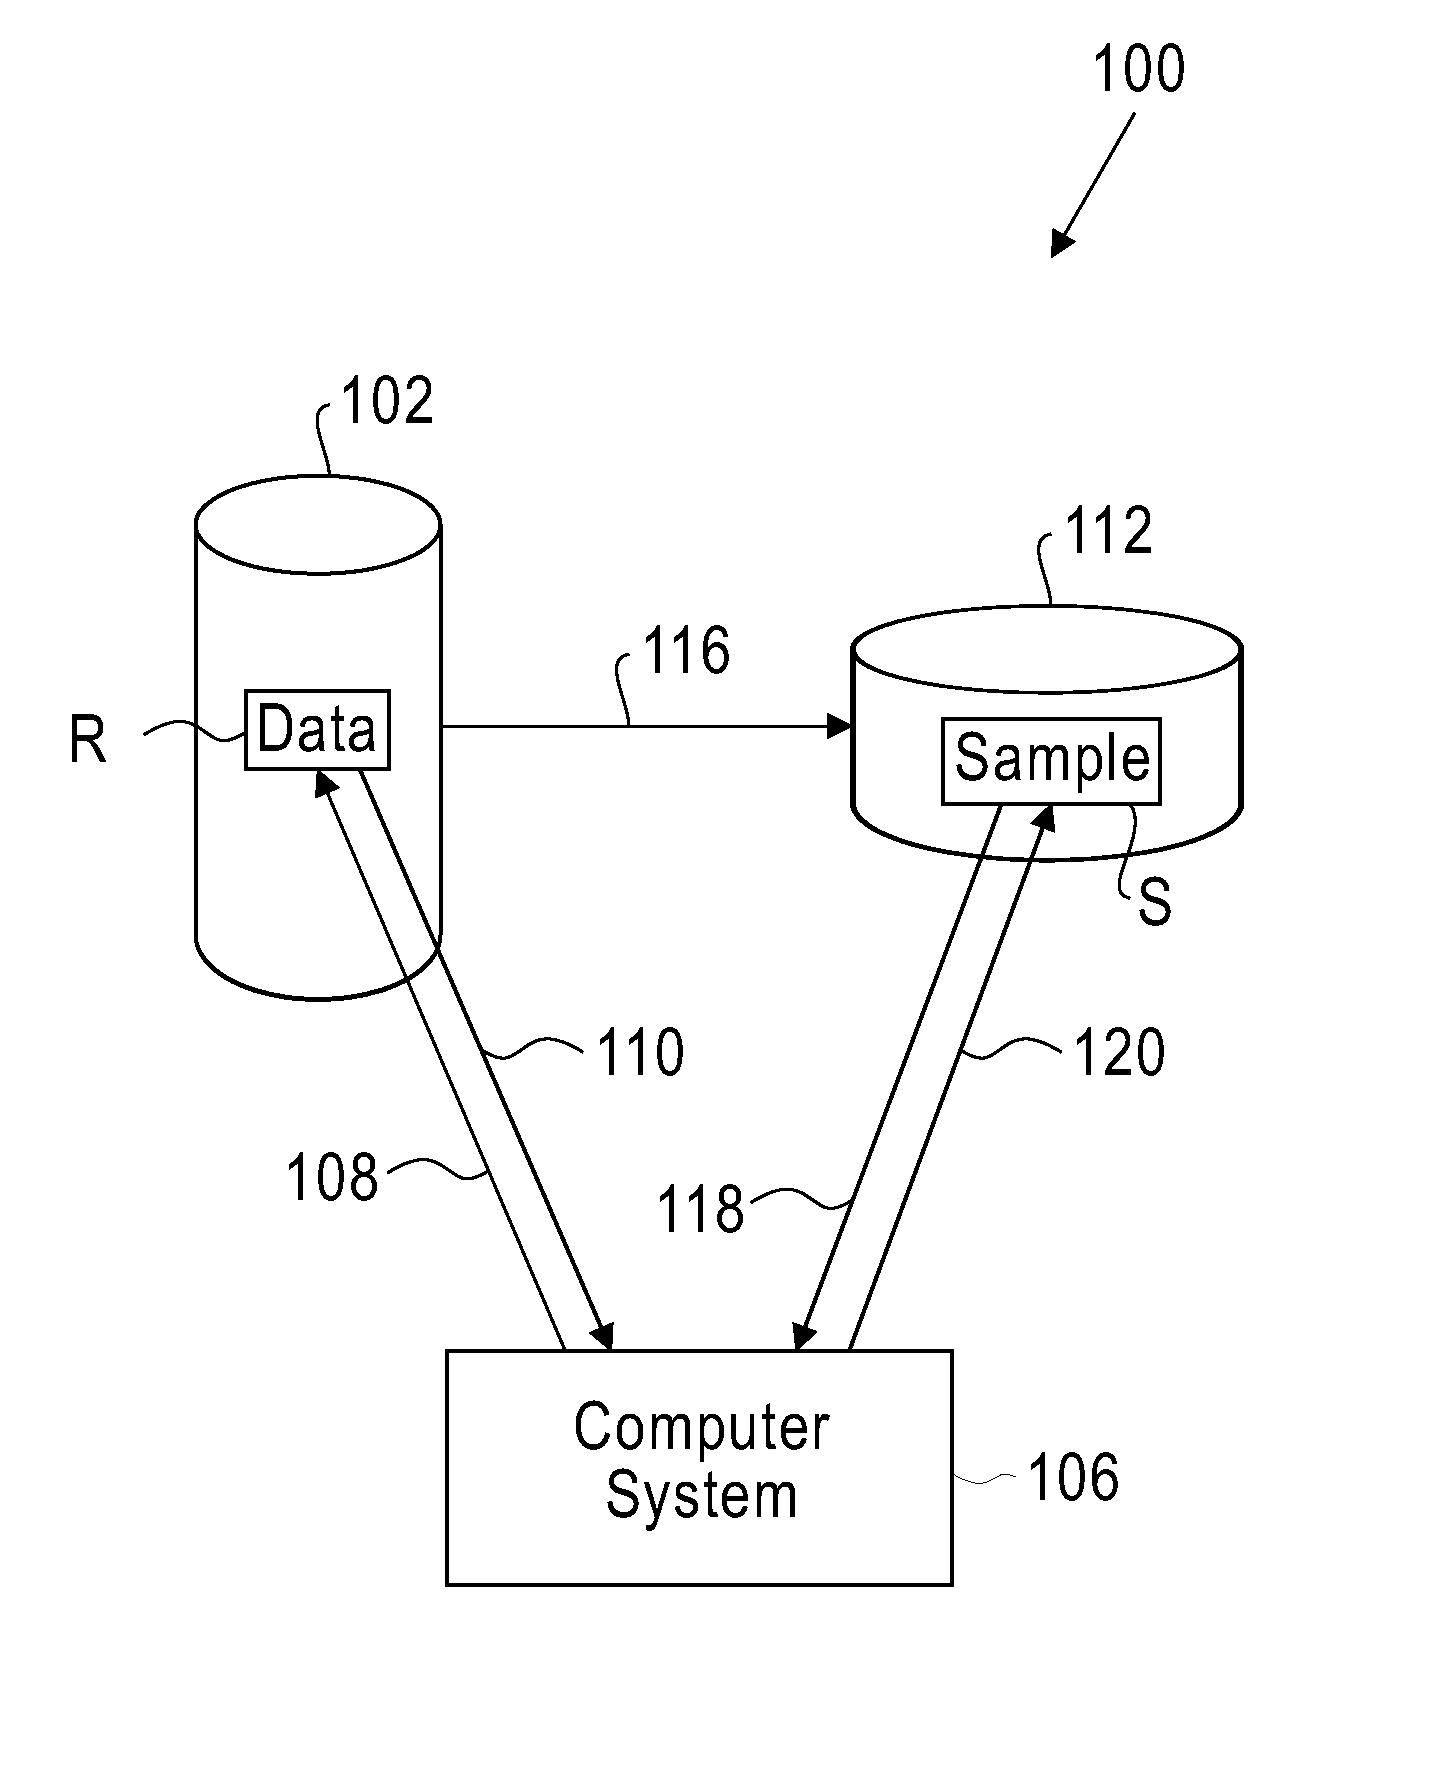 Method for maintaining a sample synopsis under arbitrary insertions and deletions